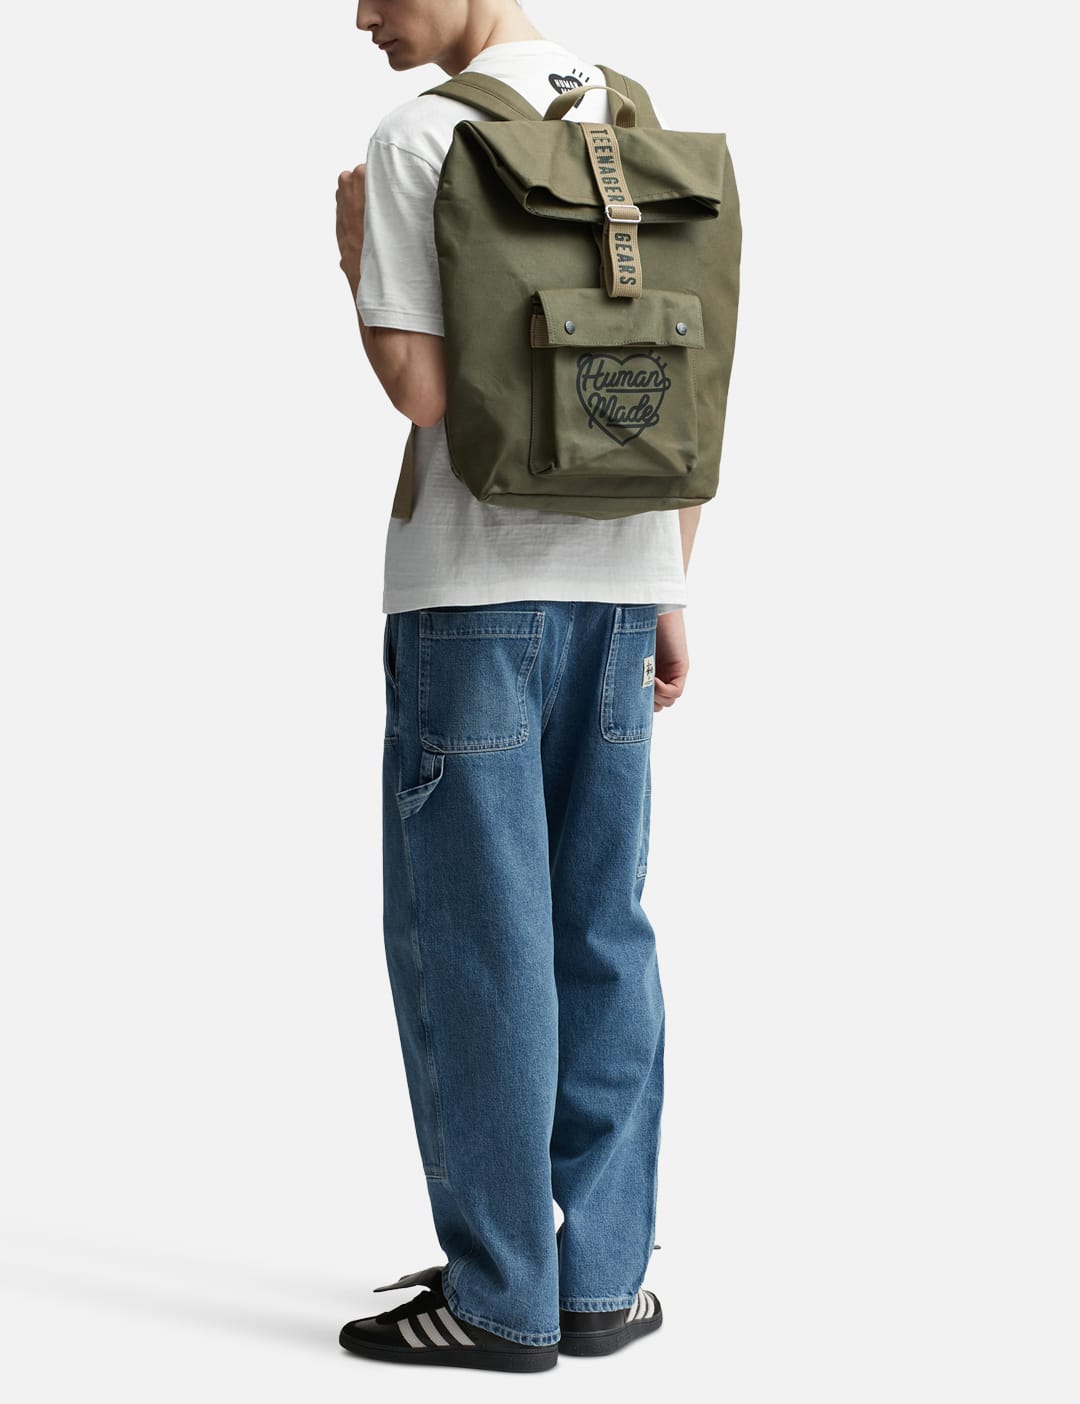 Human Made - Hunting Bag | HBX - Globally Curated Fashion and